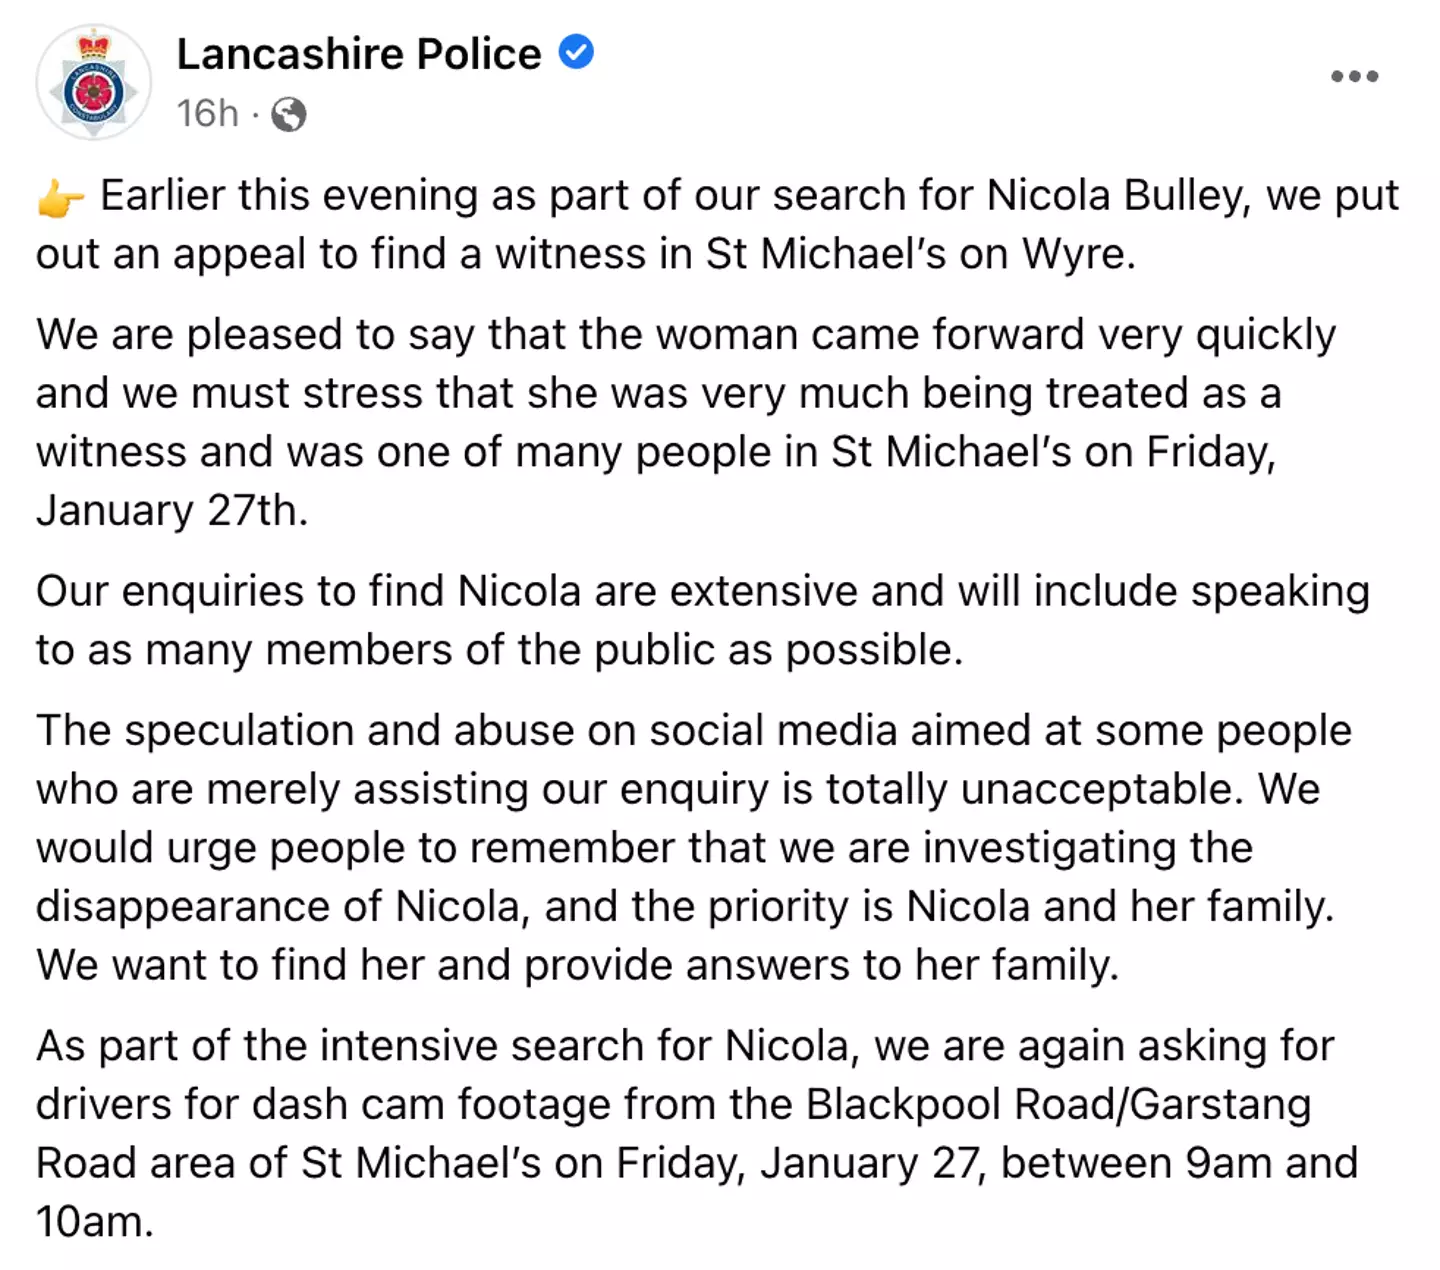 The Lancashire Police released a statement to Facebook about the witness.